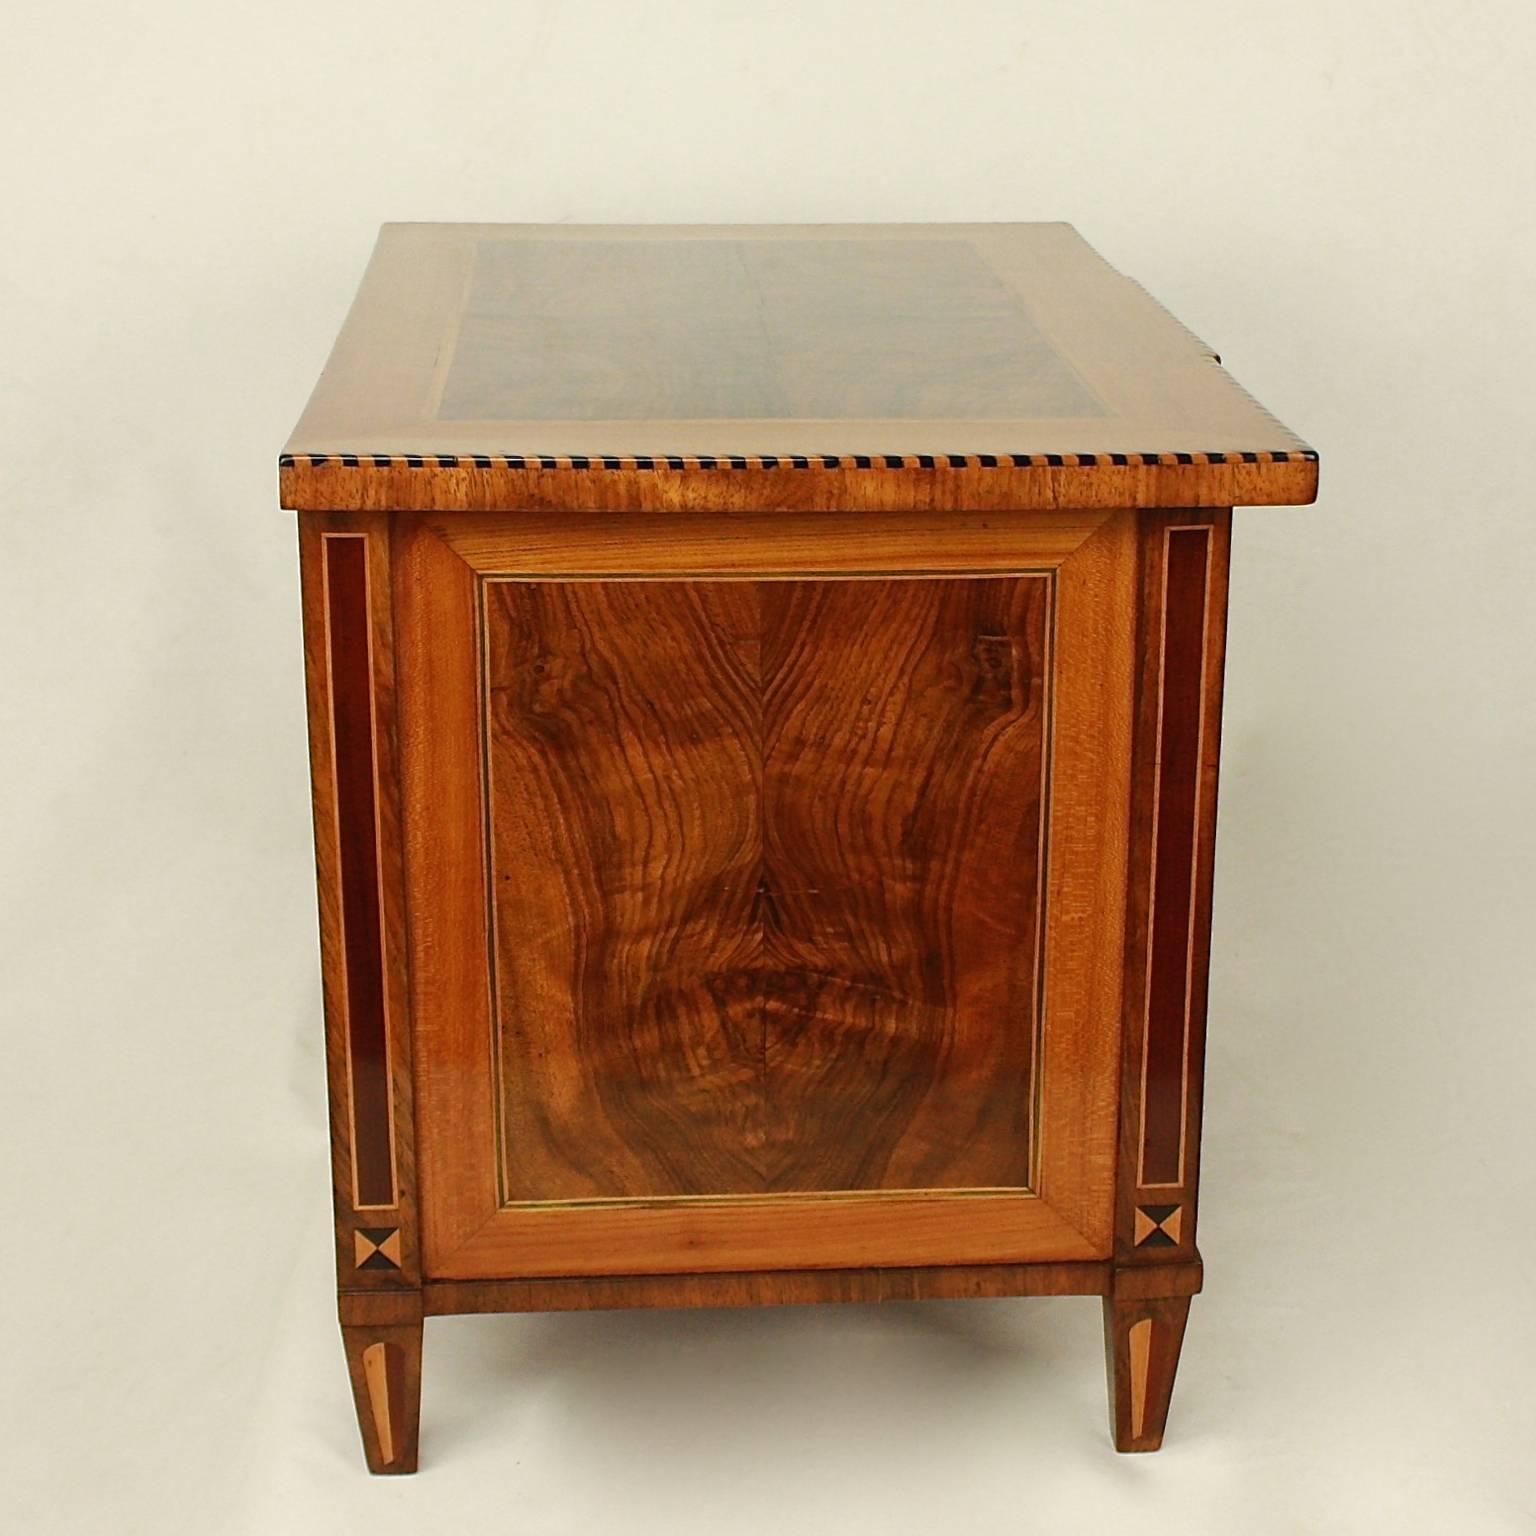 French 18th Century Louis XVI Miniature Marquetry Commode or Chest of Drawers